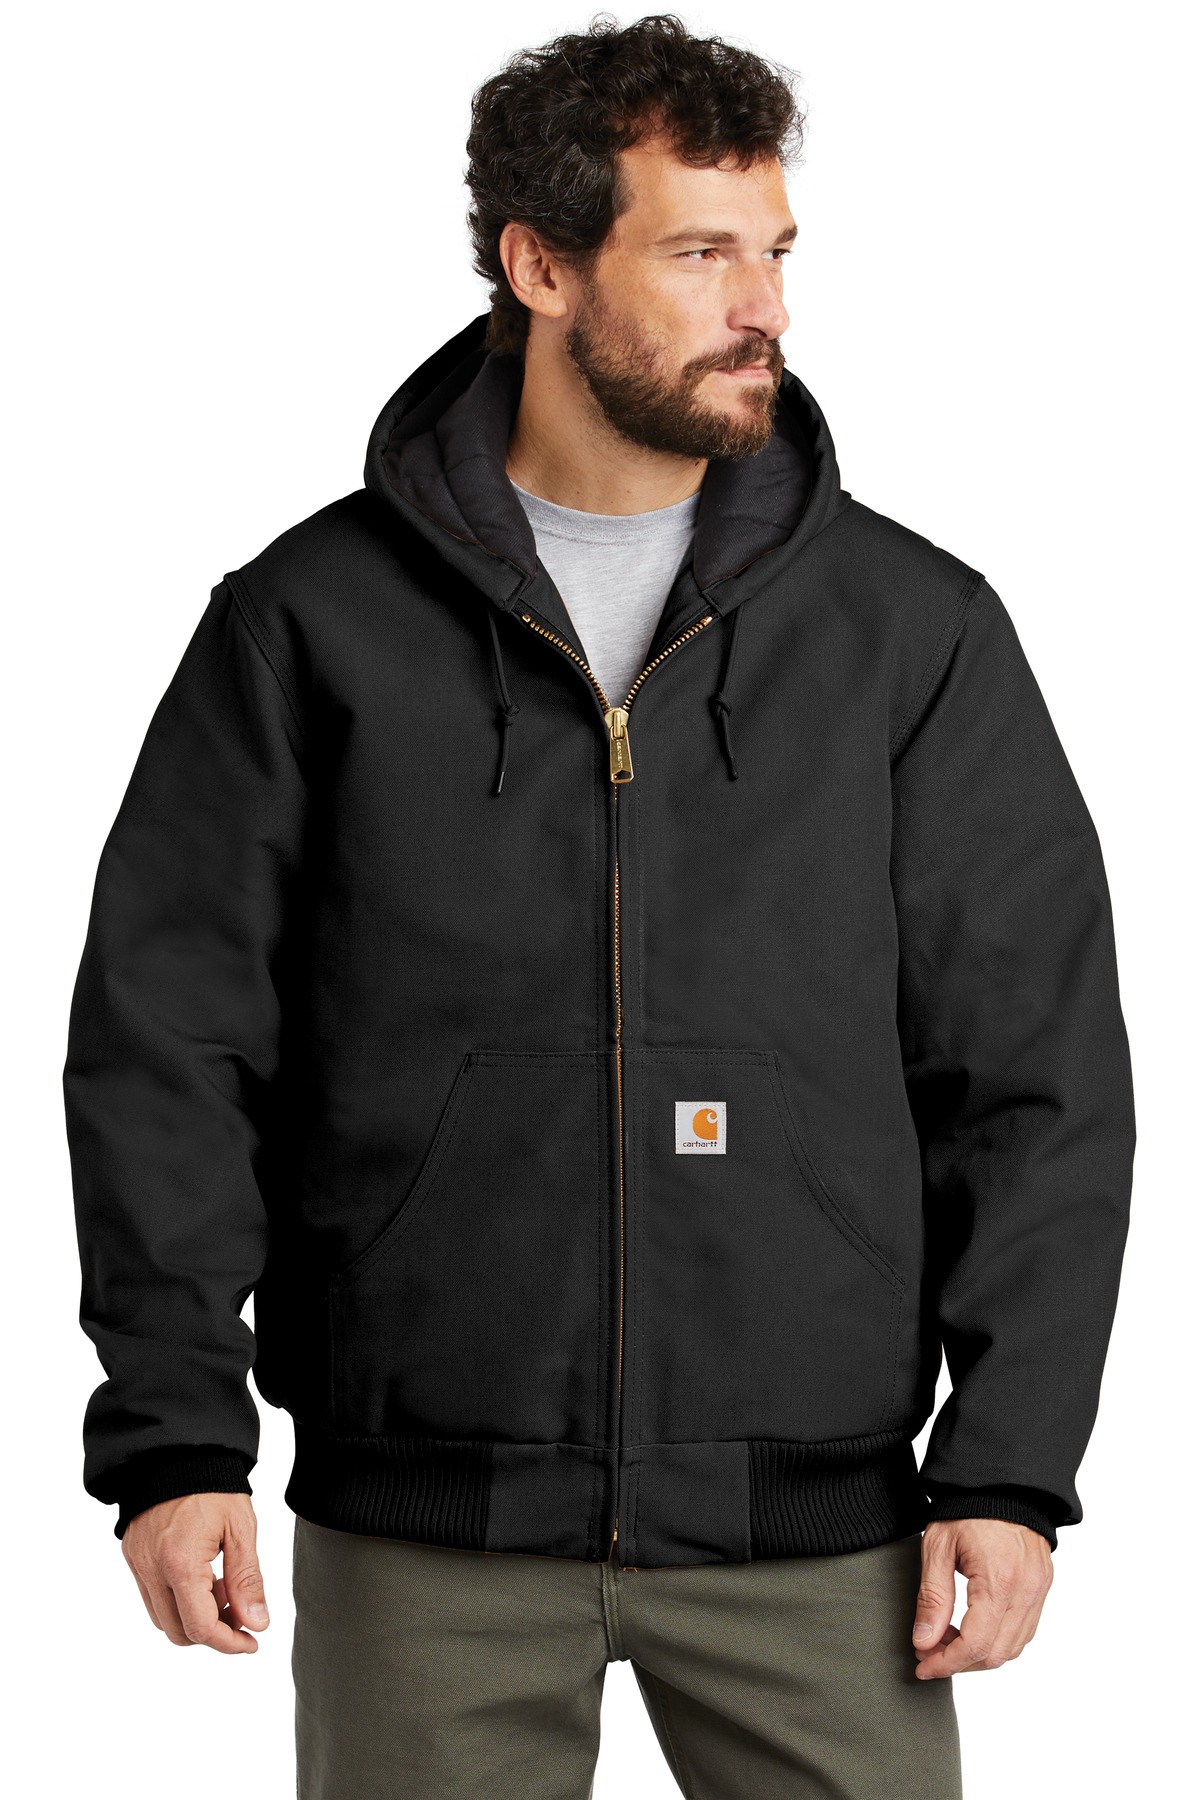 Carhartt Tall Quilted-Flannel-Lined Duck Active Jac-Carhartt